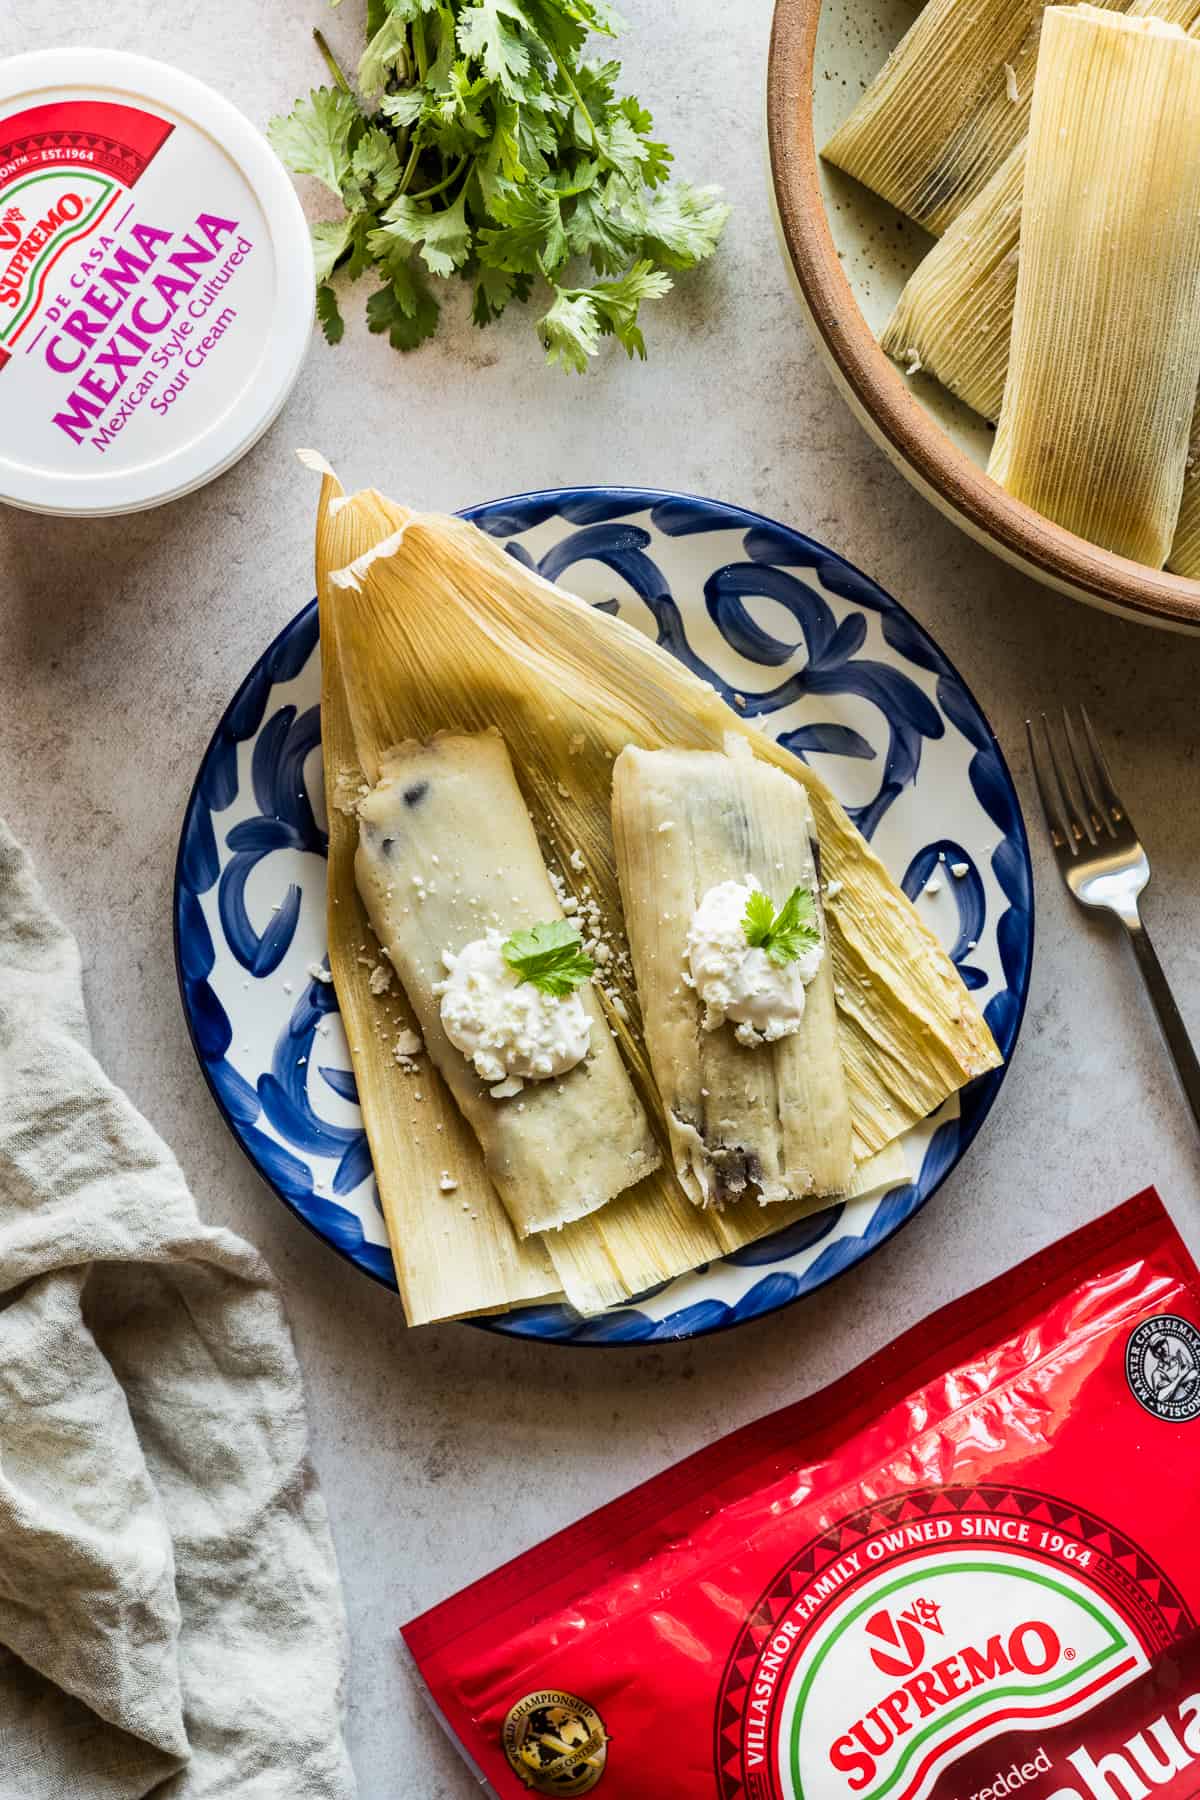 Black bean and cheese tamales garnished with crema and cotija cheese.